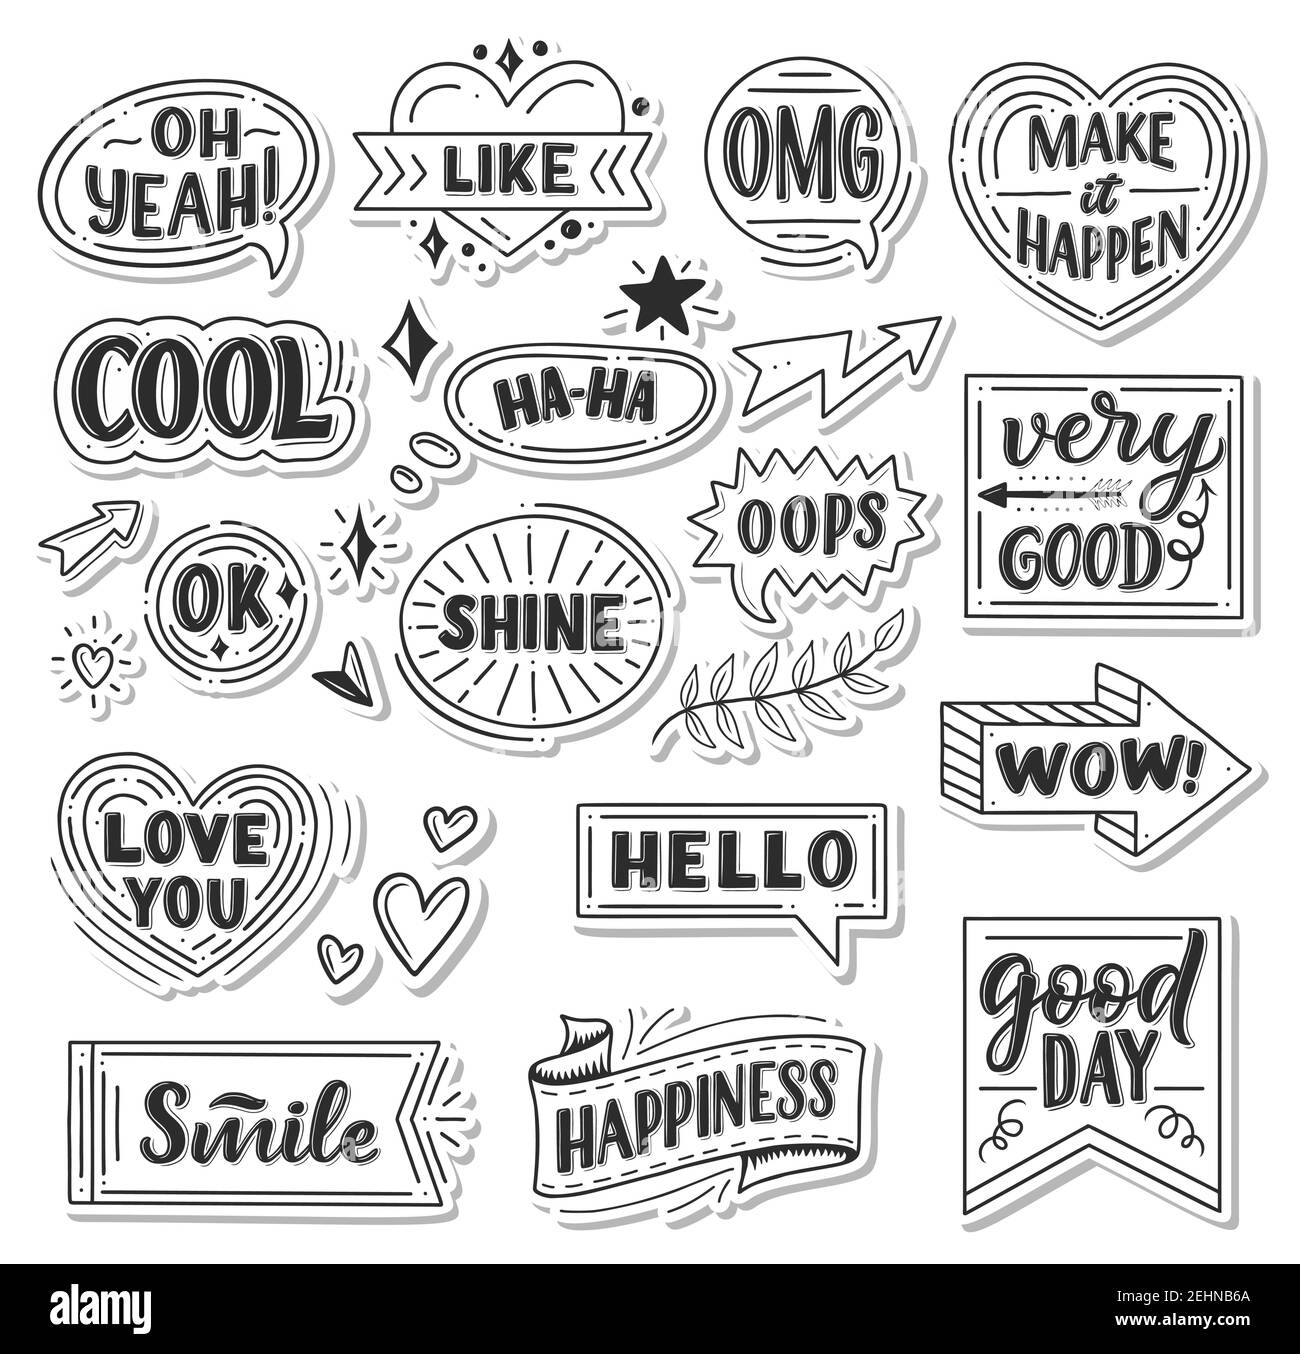 Quotes and sound blasts stickers. Vector sketch doodle icons, ribbons or arrows and banners or chat messages for Yeah, smile or hello and happiness gr Stock Vector